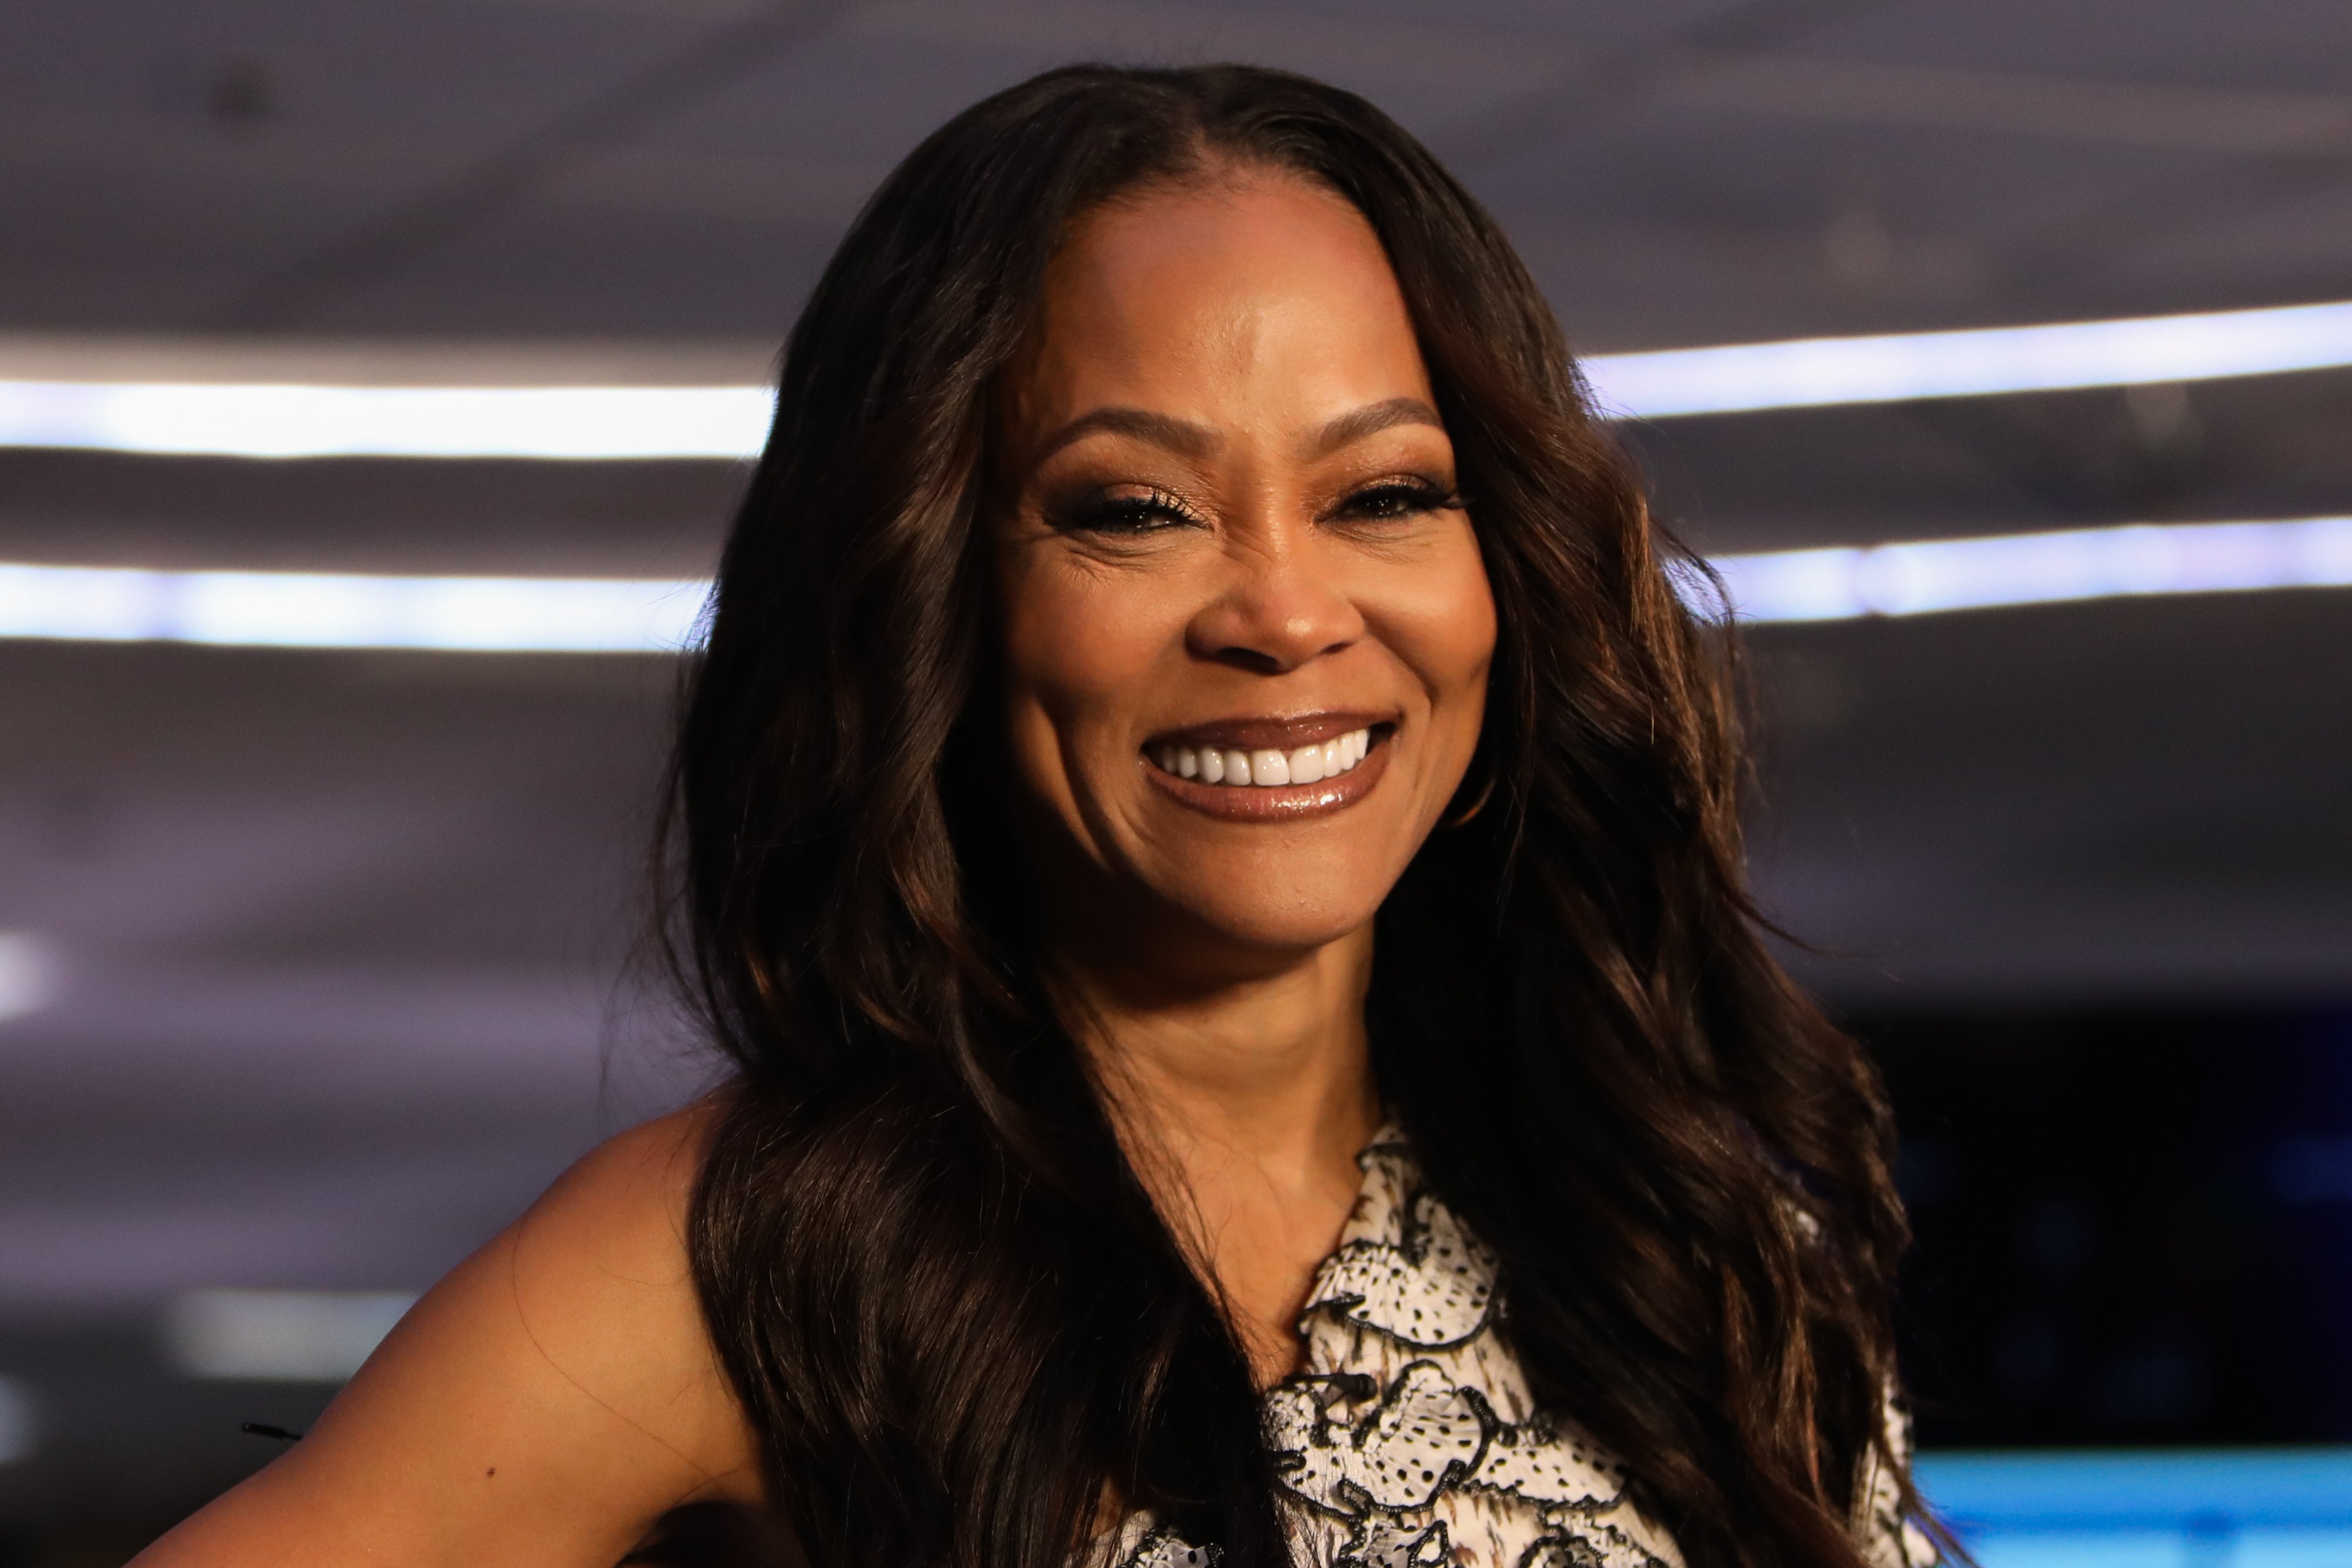 Robin Givens at Burbank Studios on November 12, 2019 in Burbank, California | Source: Getty Images